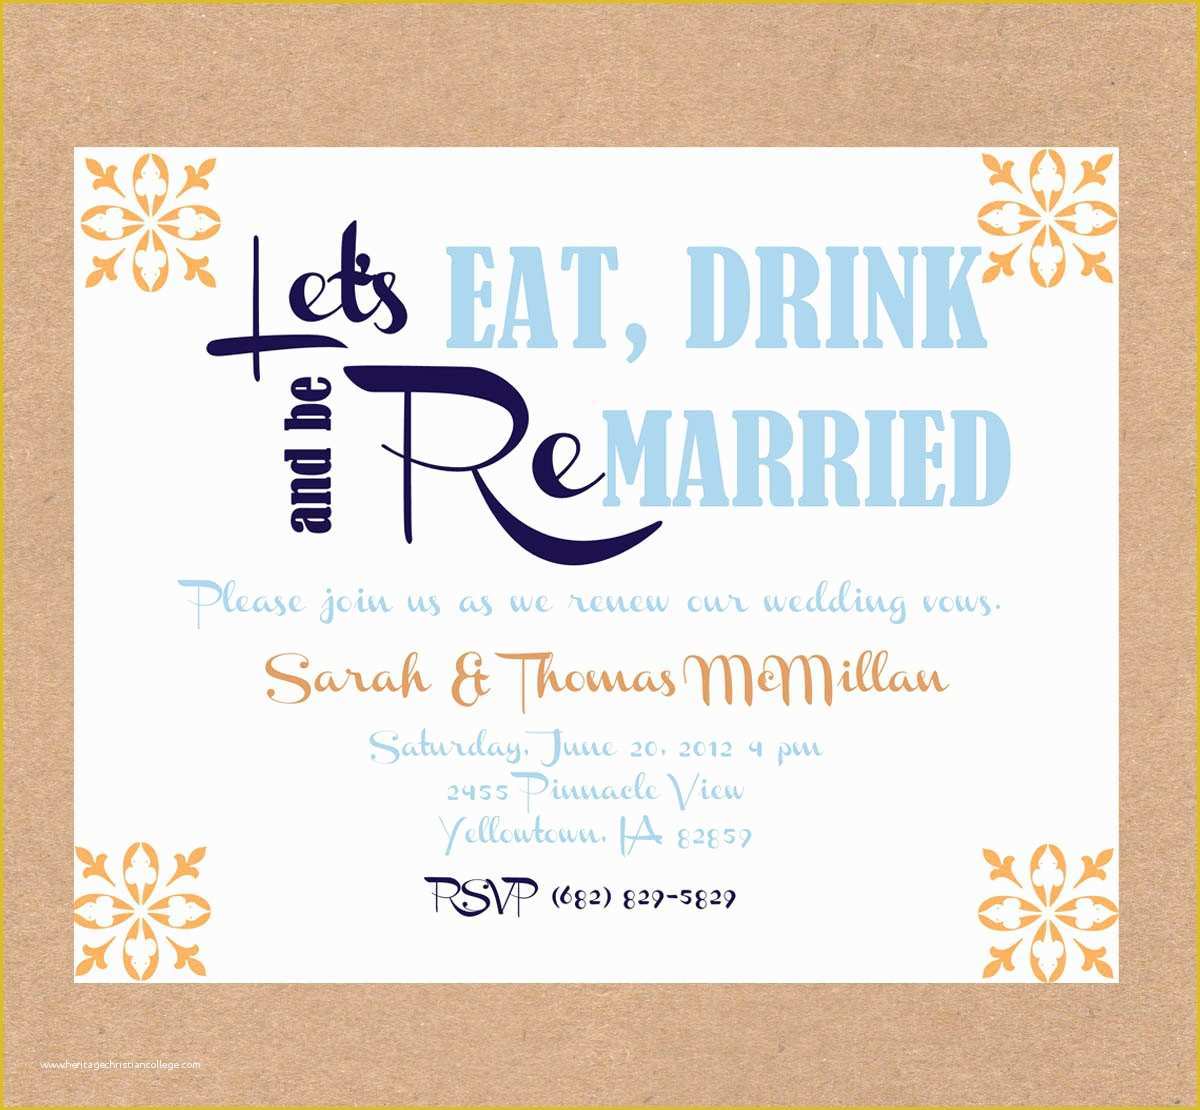 Vow Renewal Invitation Templates Free Of Vow Renewal Invitation Eat Drink and Be Married